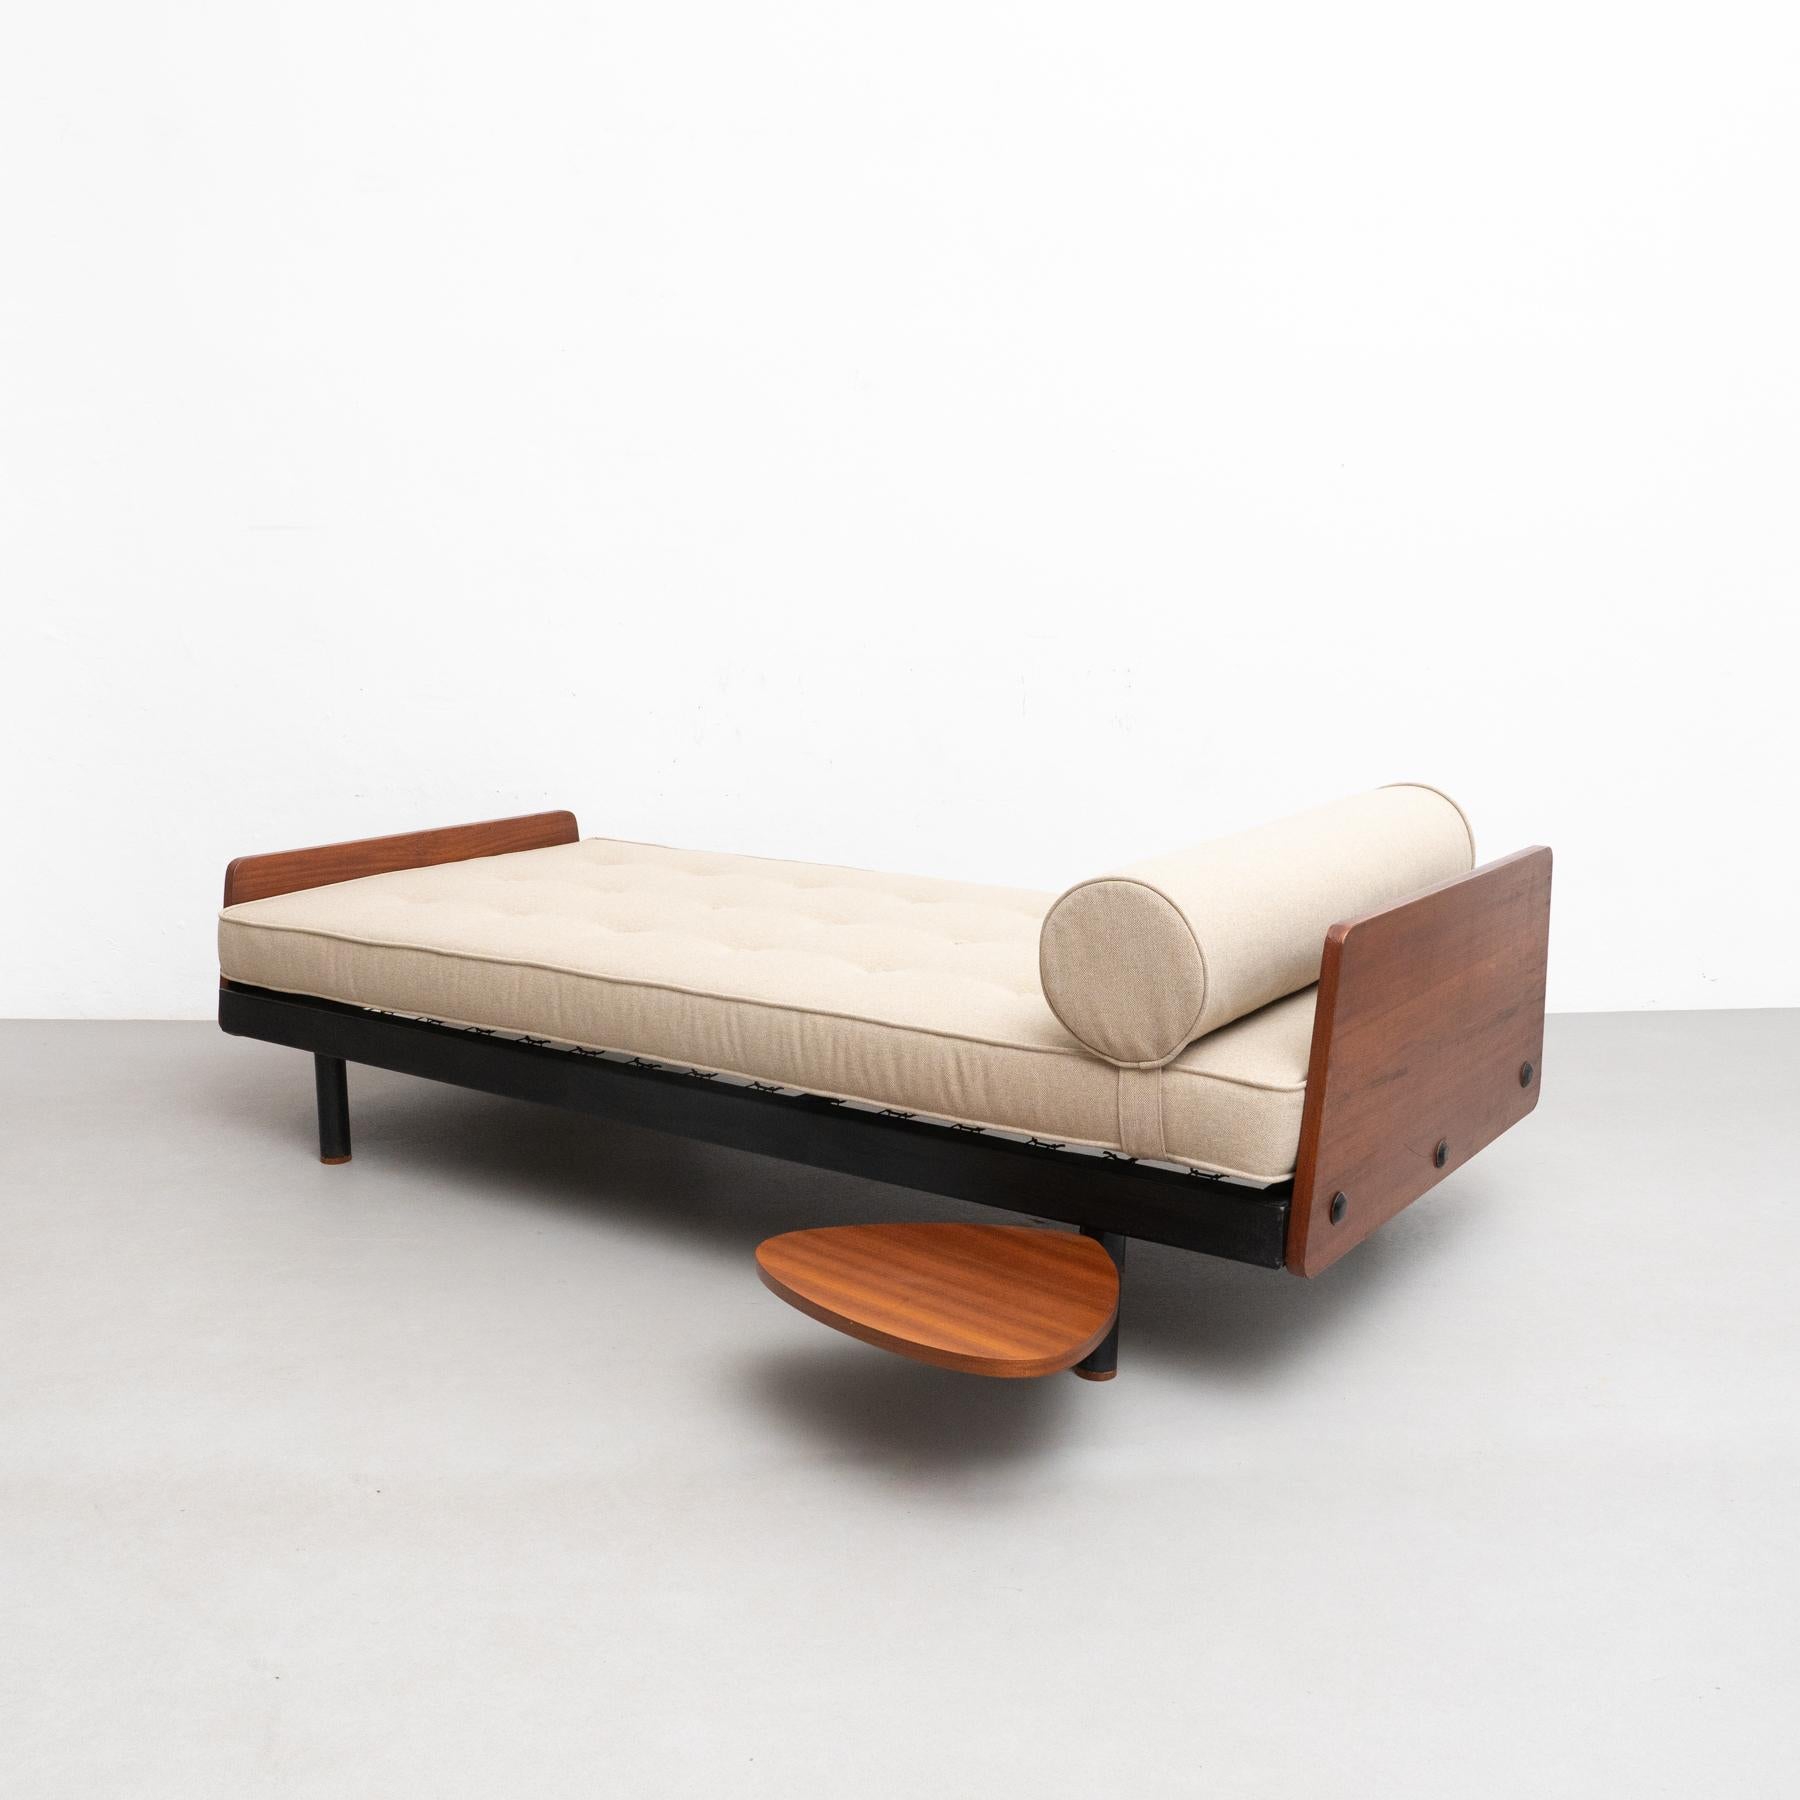 Mid-20th Century Jean Prouve Mid-Century Modern S.C.A.L. Daybed, circa 1950